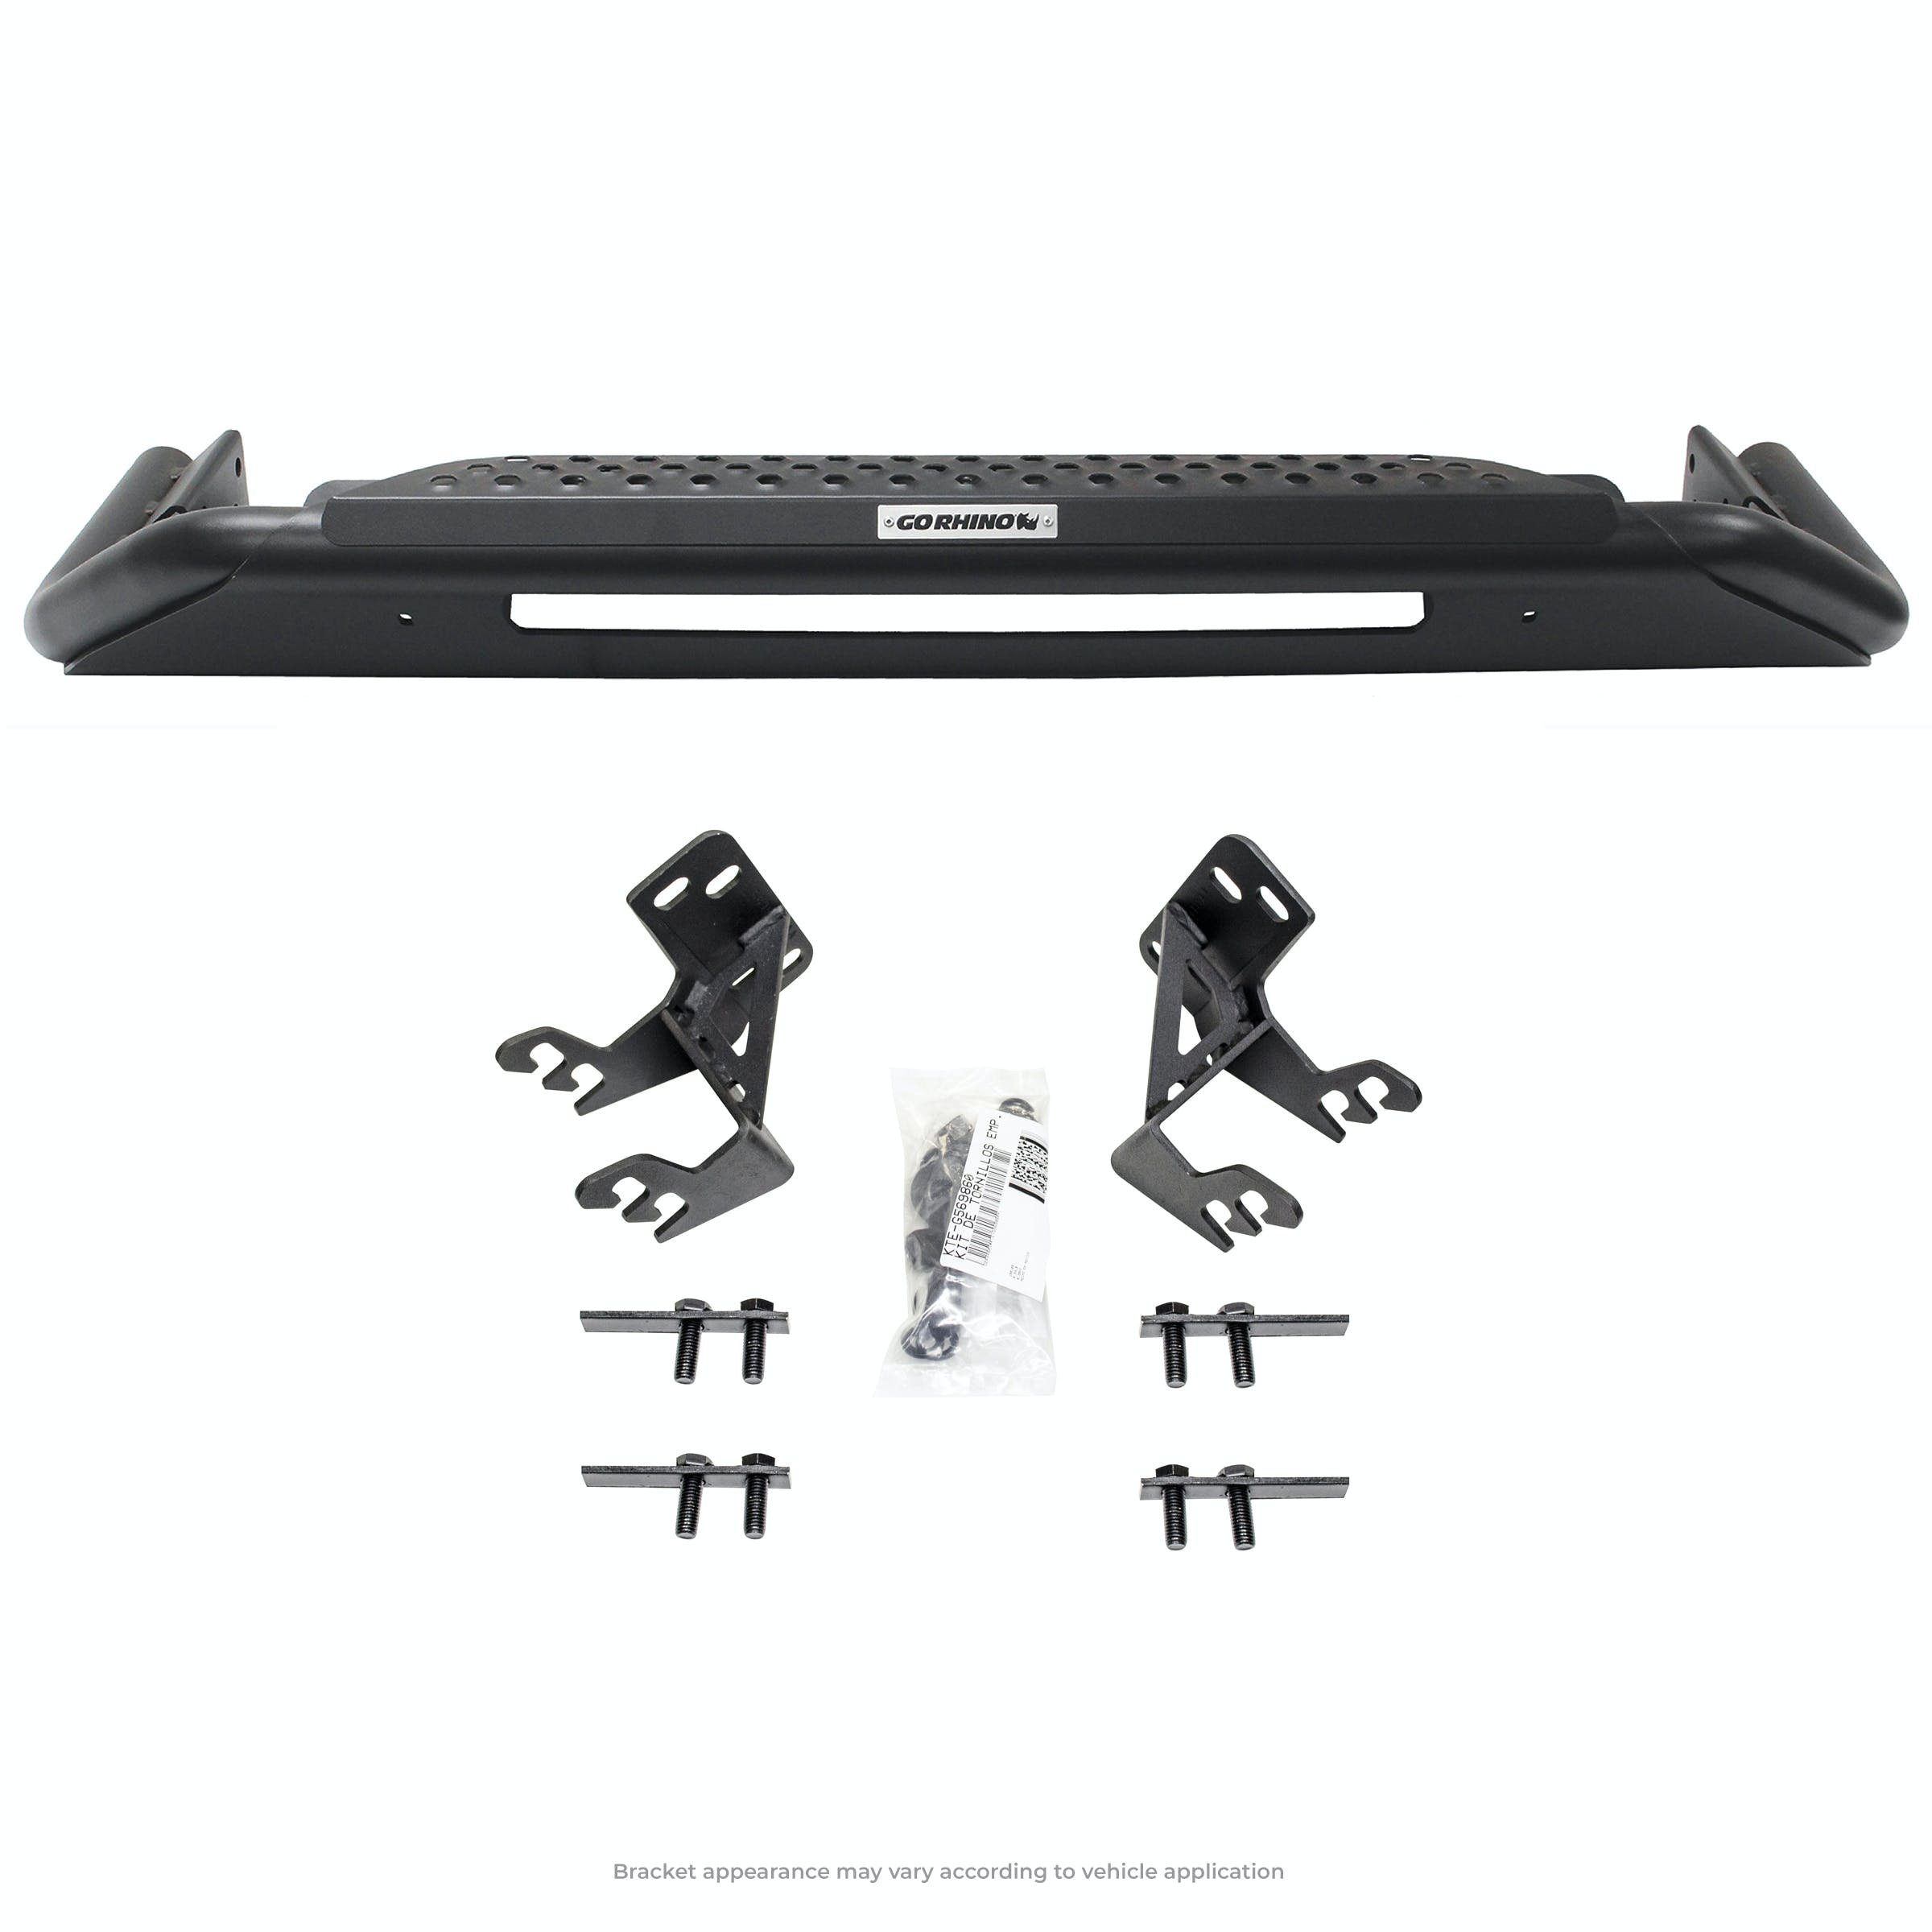 Go Rhino 562960T RC3 LR - Complete kit: Front guard + Brackets